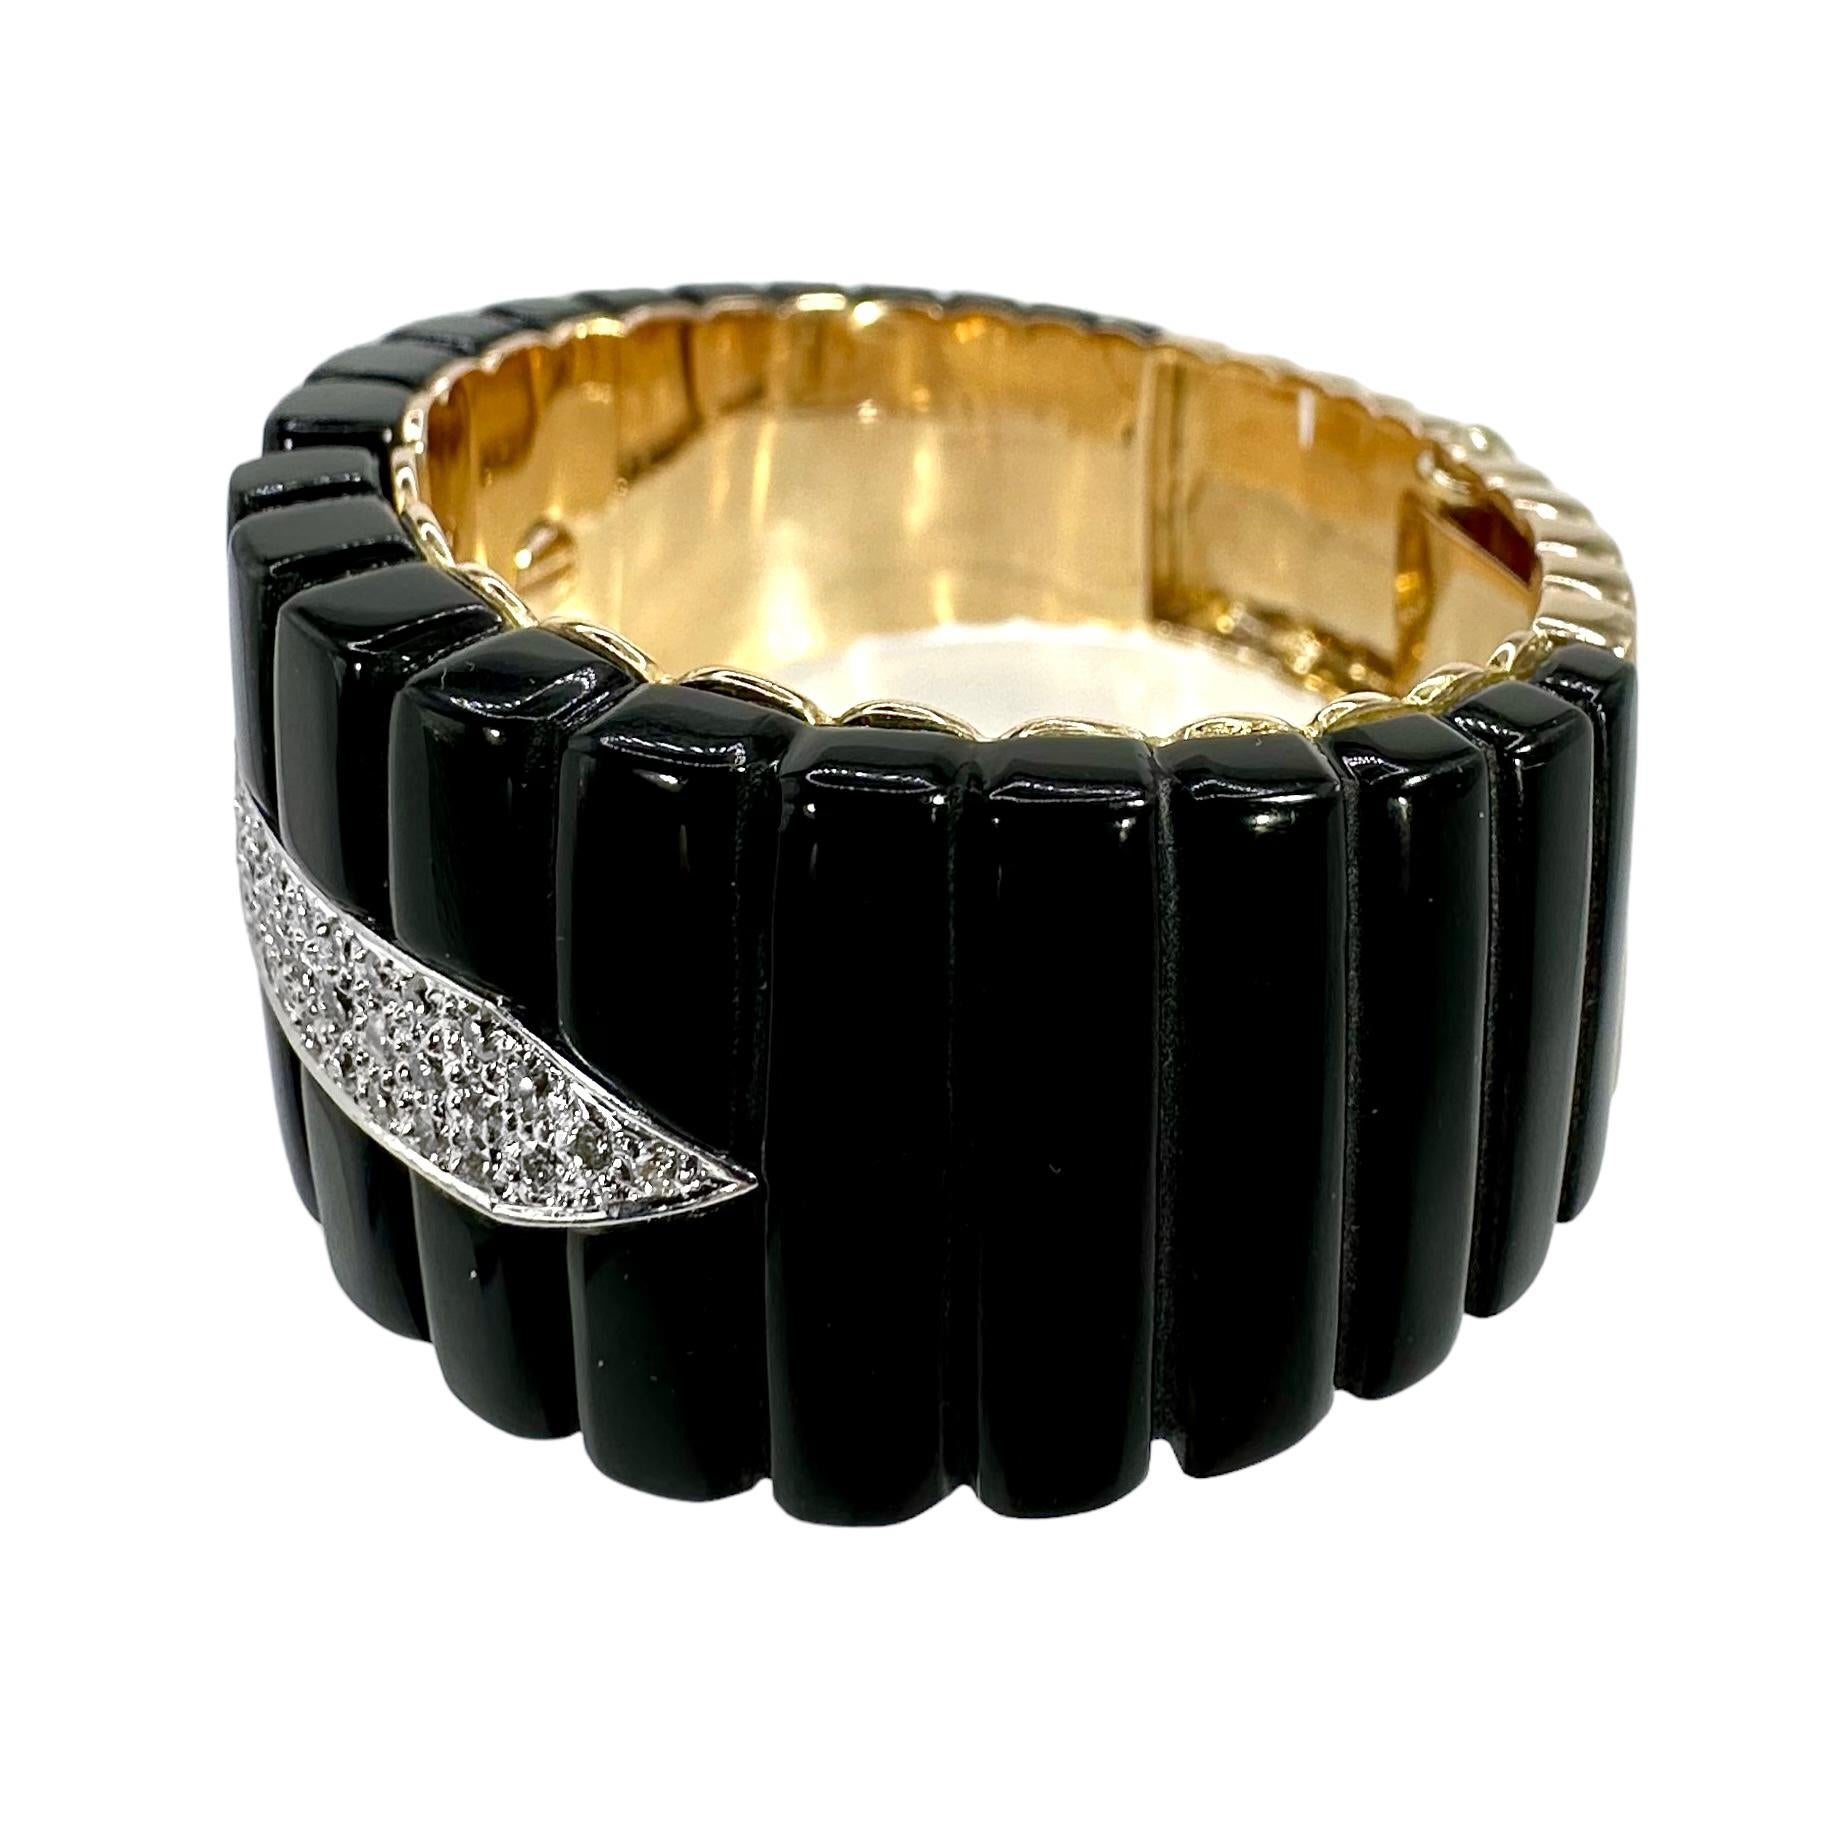 Bold & Stylish Late-20th Century Gold, Onyx & Diamond Cuff Bracelet 1 Inch Wide In Good Condition For Sale In Palm Beach, FL